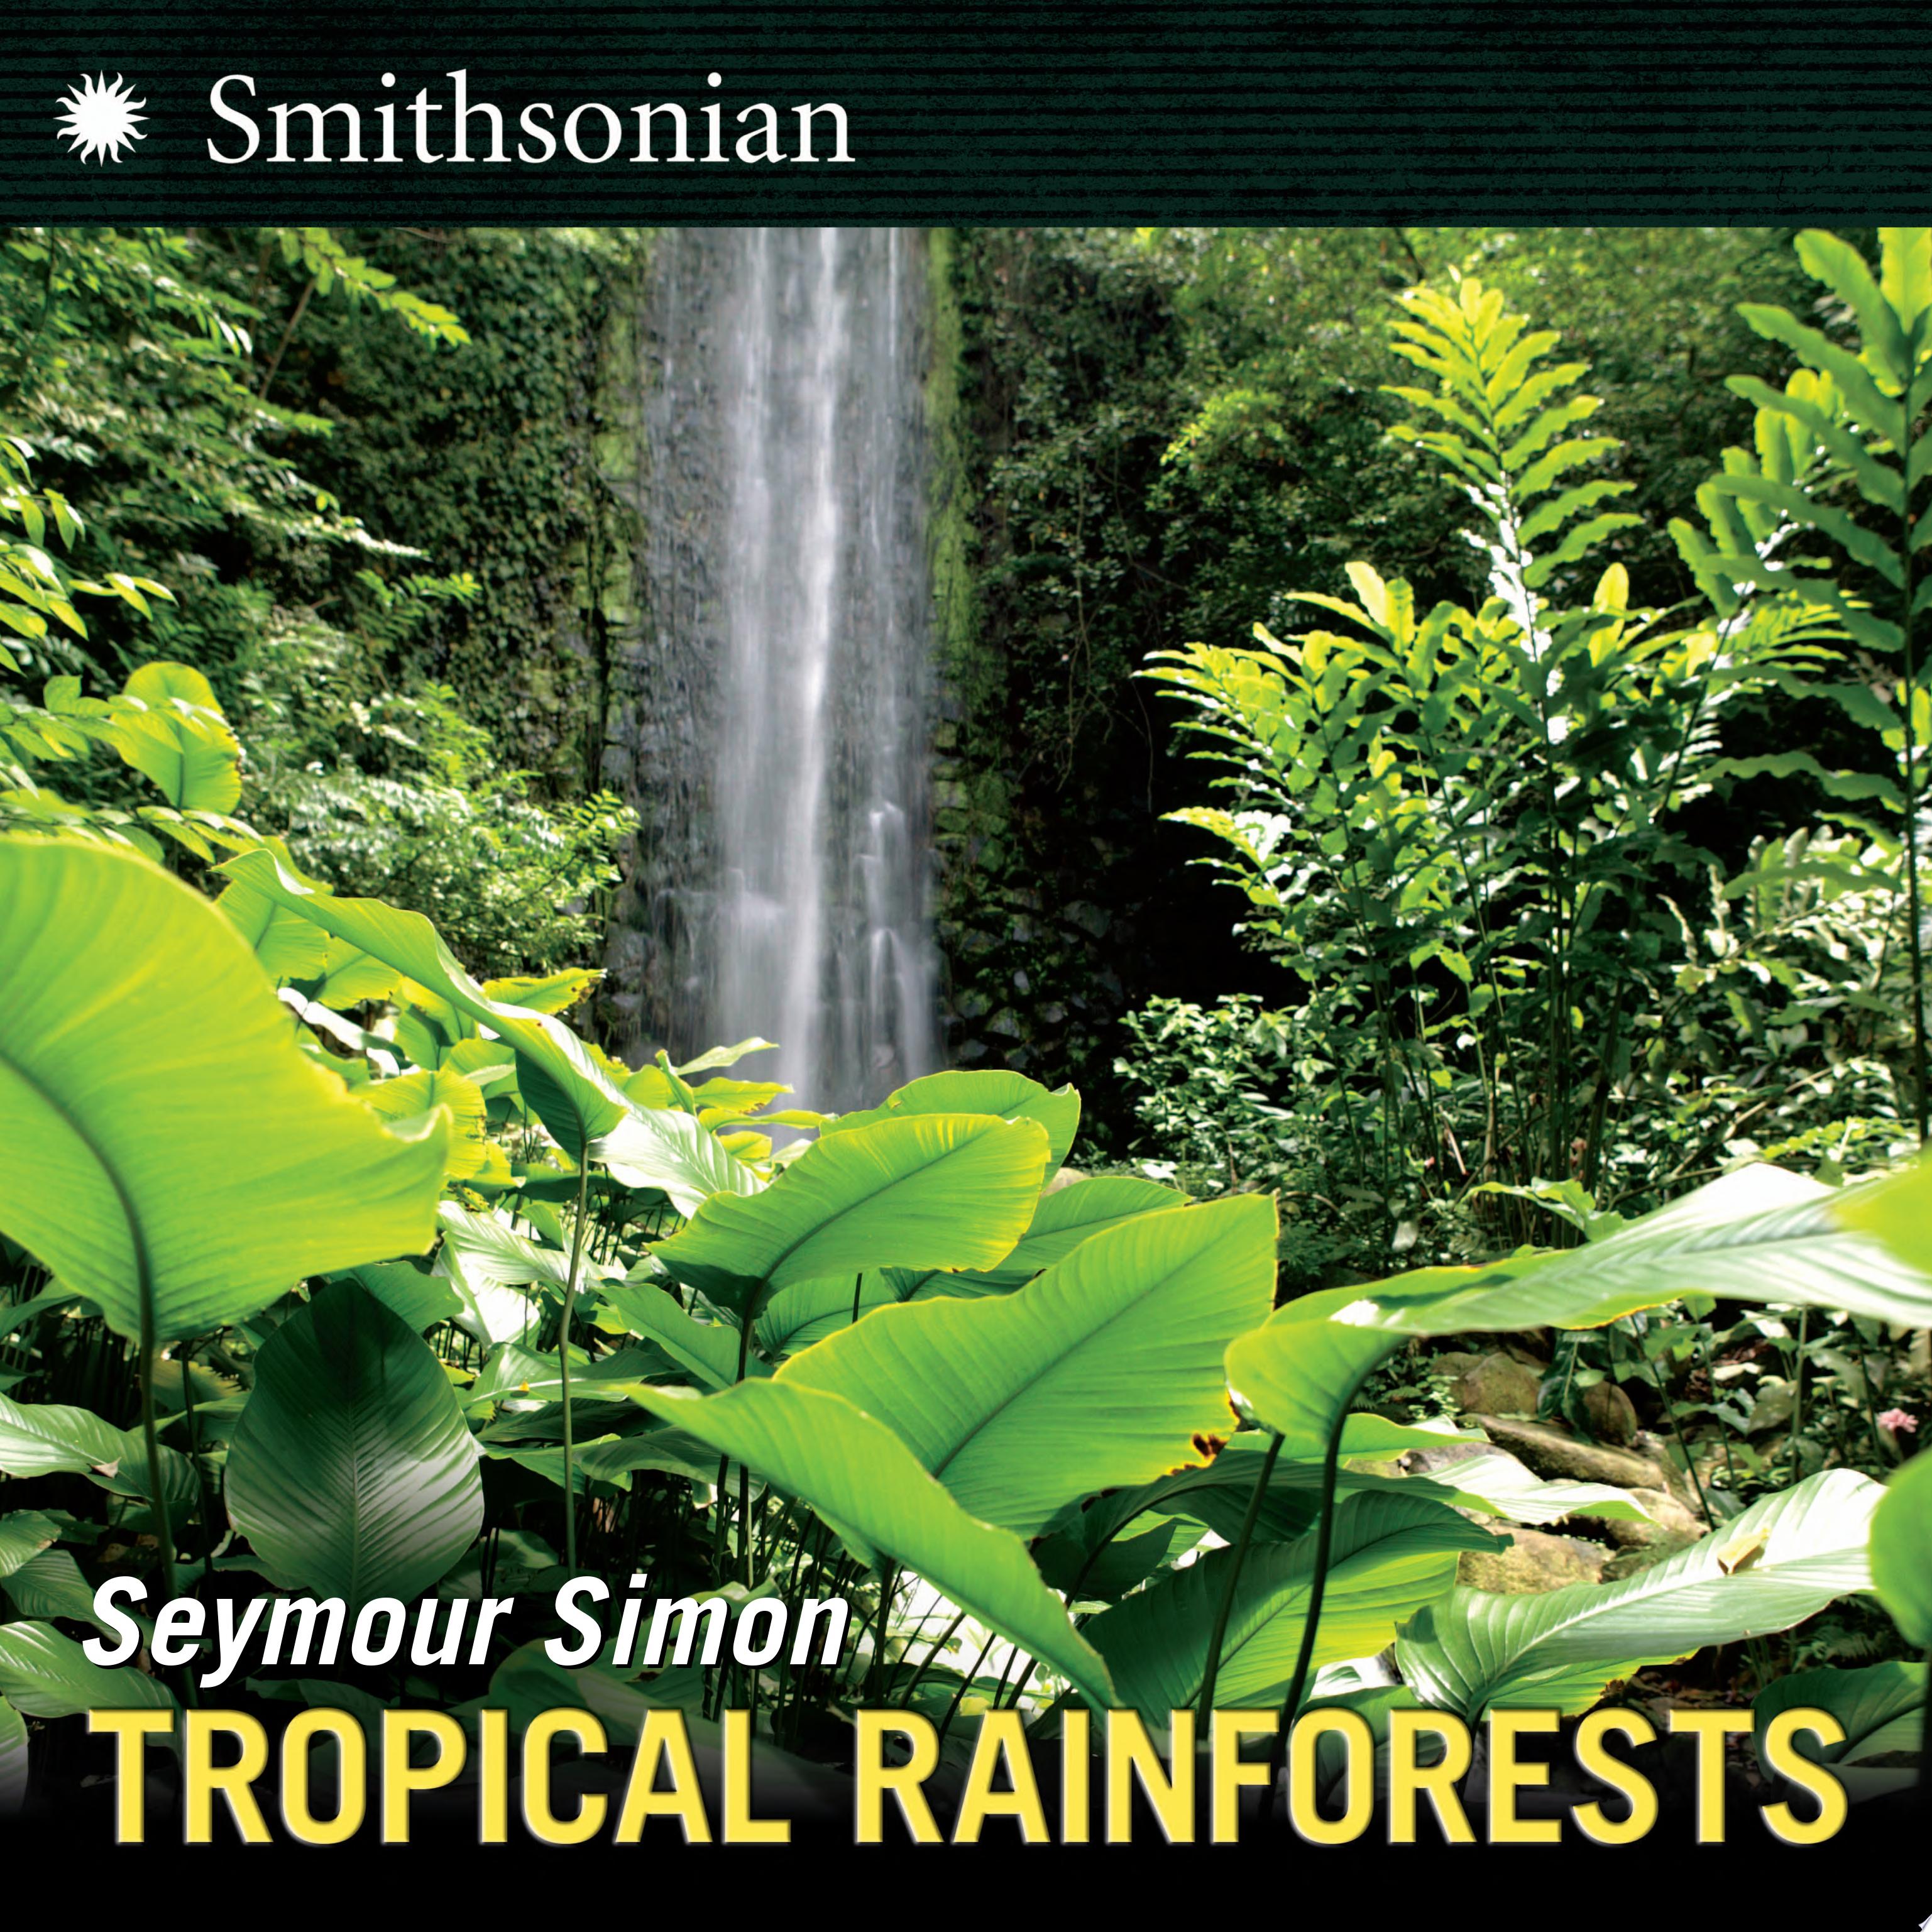 Image for "Tropical Rainforests"